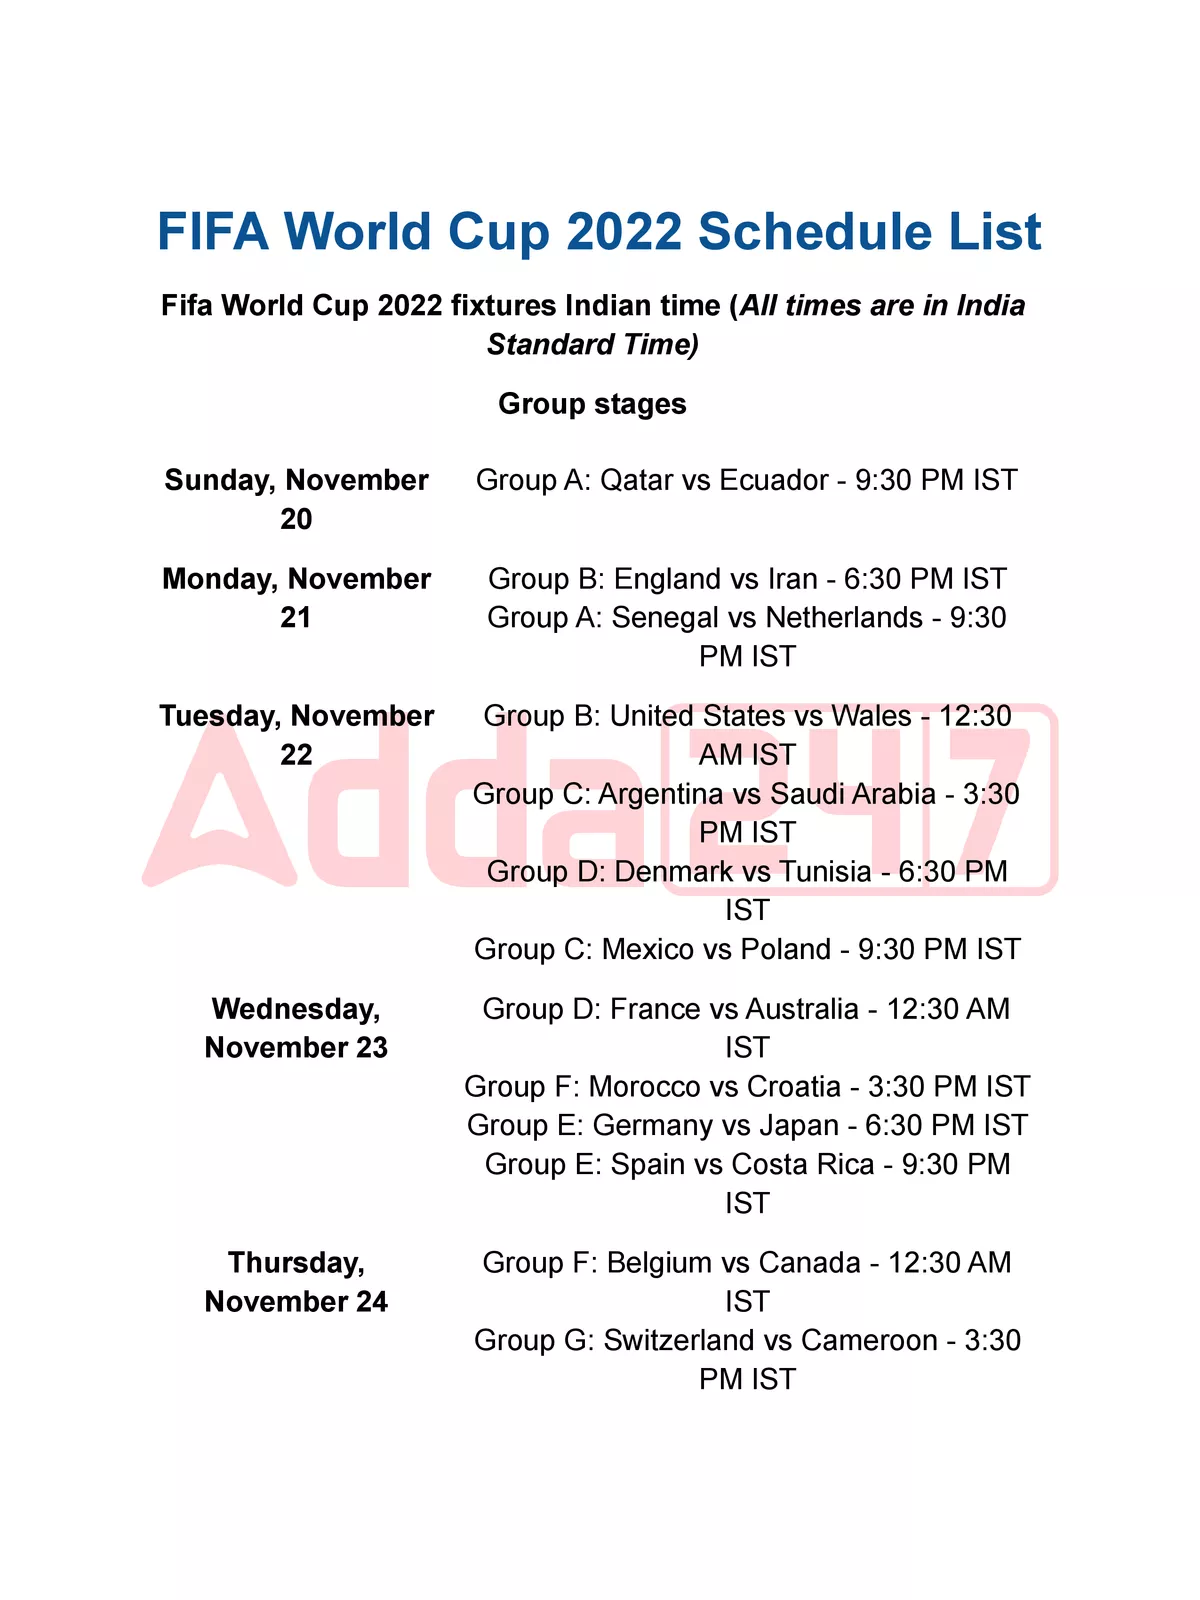 FIFA World Cup 2022 Schedule Indian Time